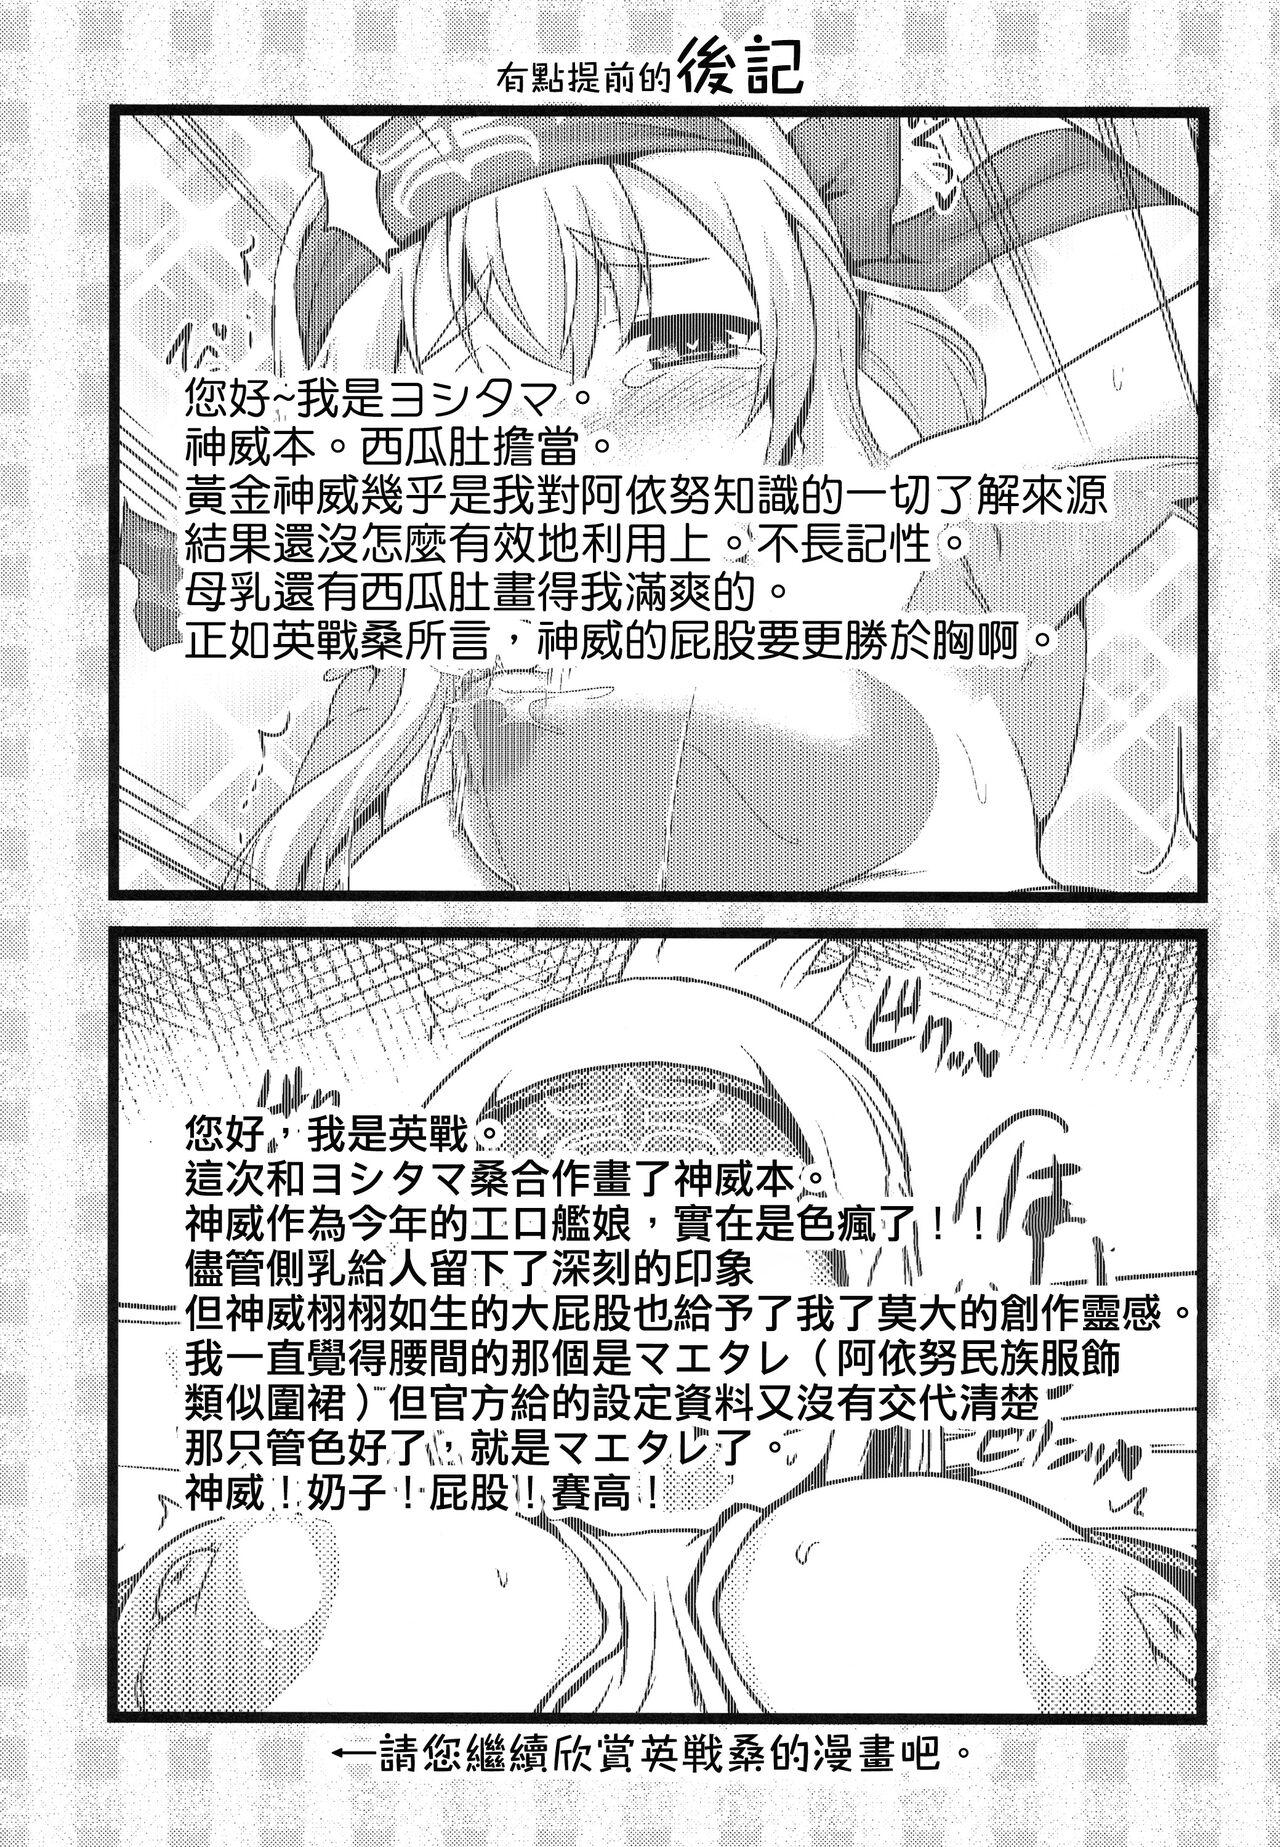 Party Kamoi to Ochiu. - Kantai collection Special Locations - Page 11